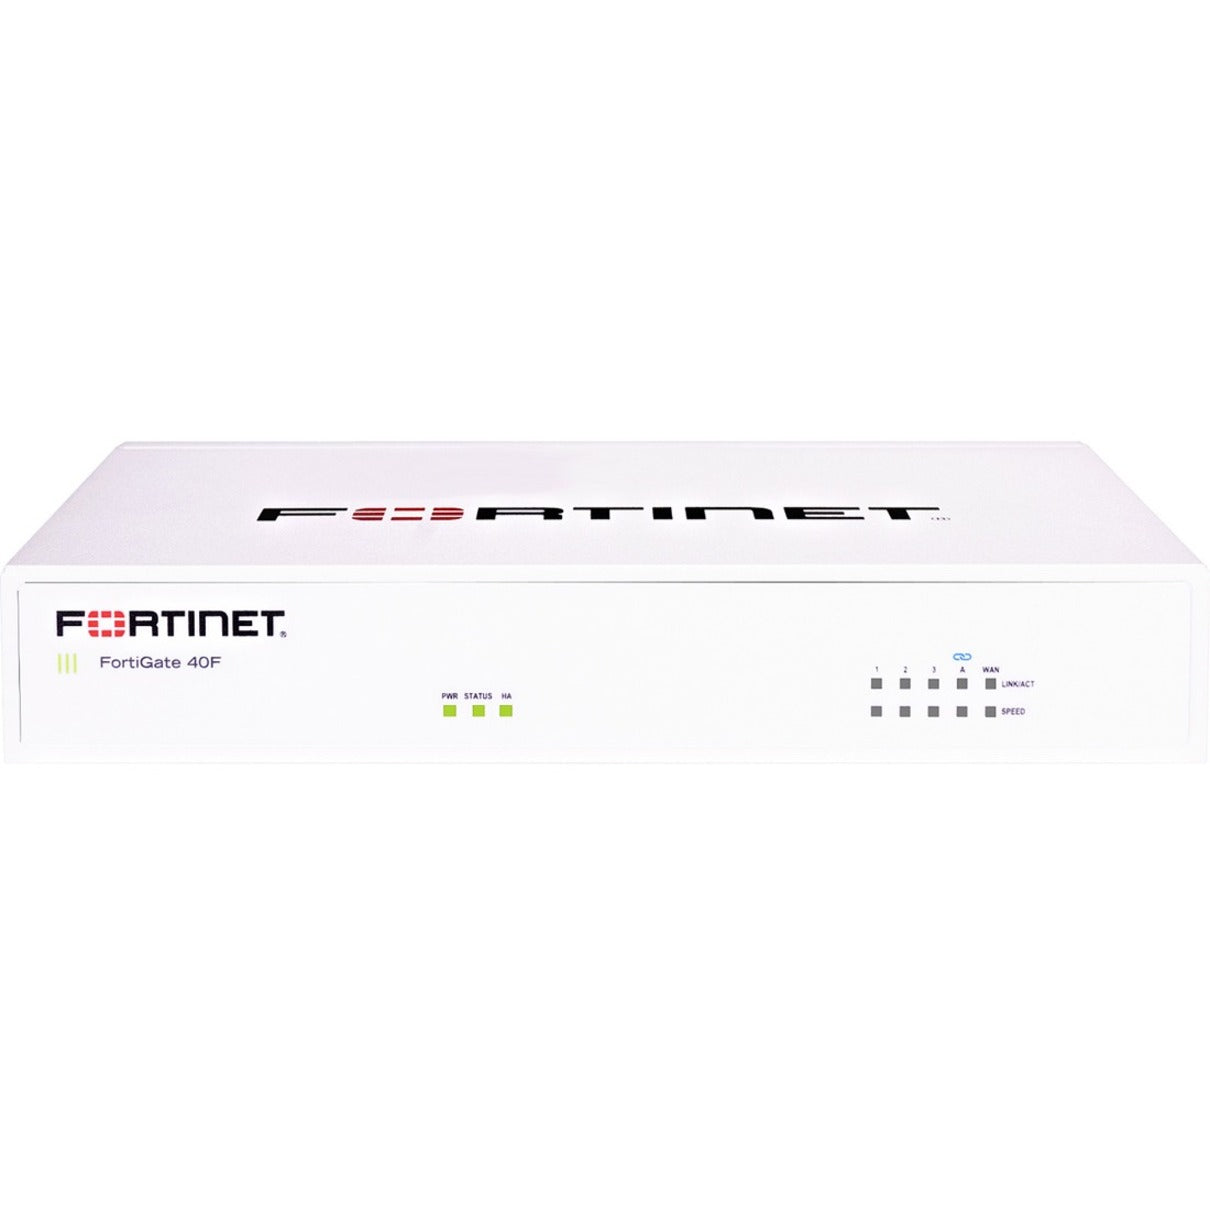 Fortinet FG-40F-BDL-950-12 FortiGate Network Security/Firewall Appliance, TAA Compliant, 5 Ports, Gigabit Ethernet